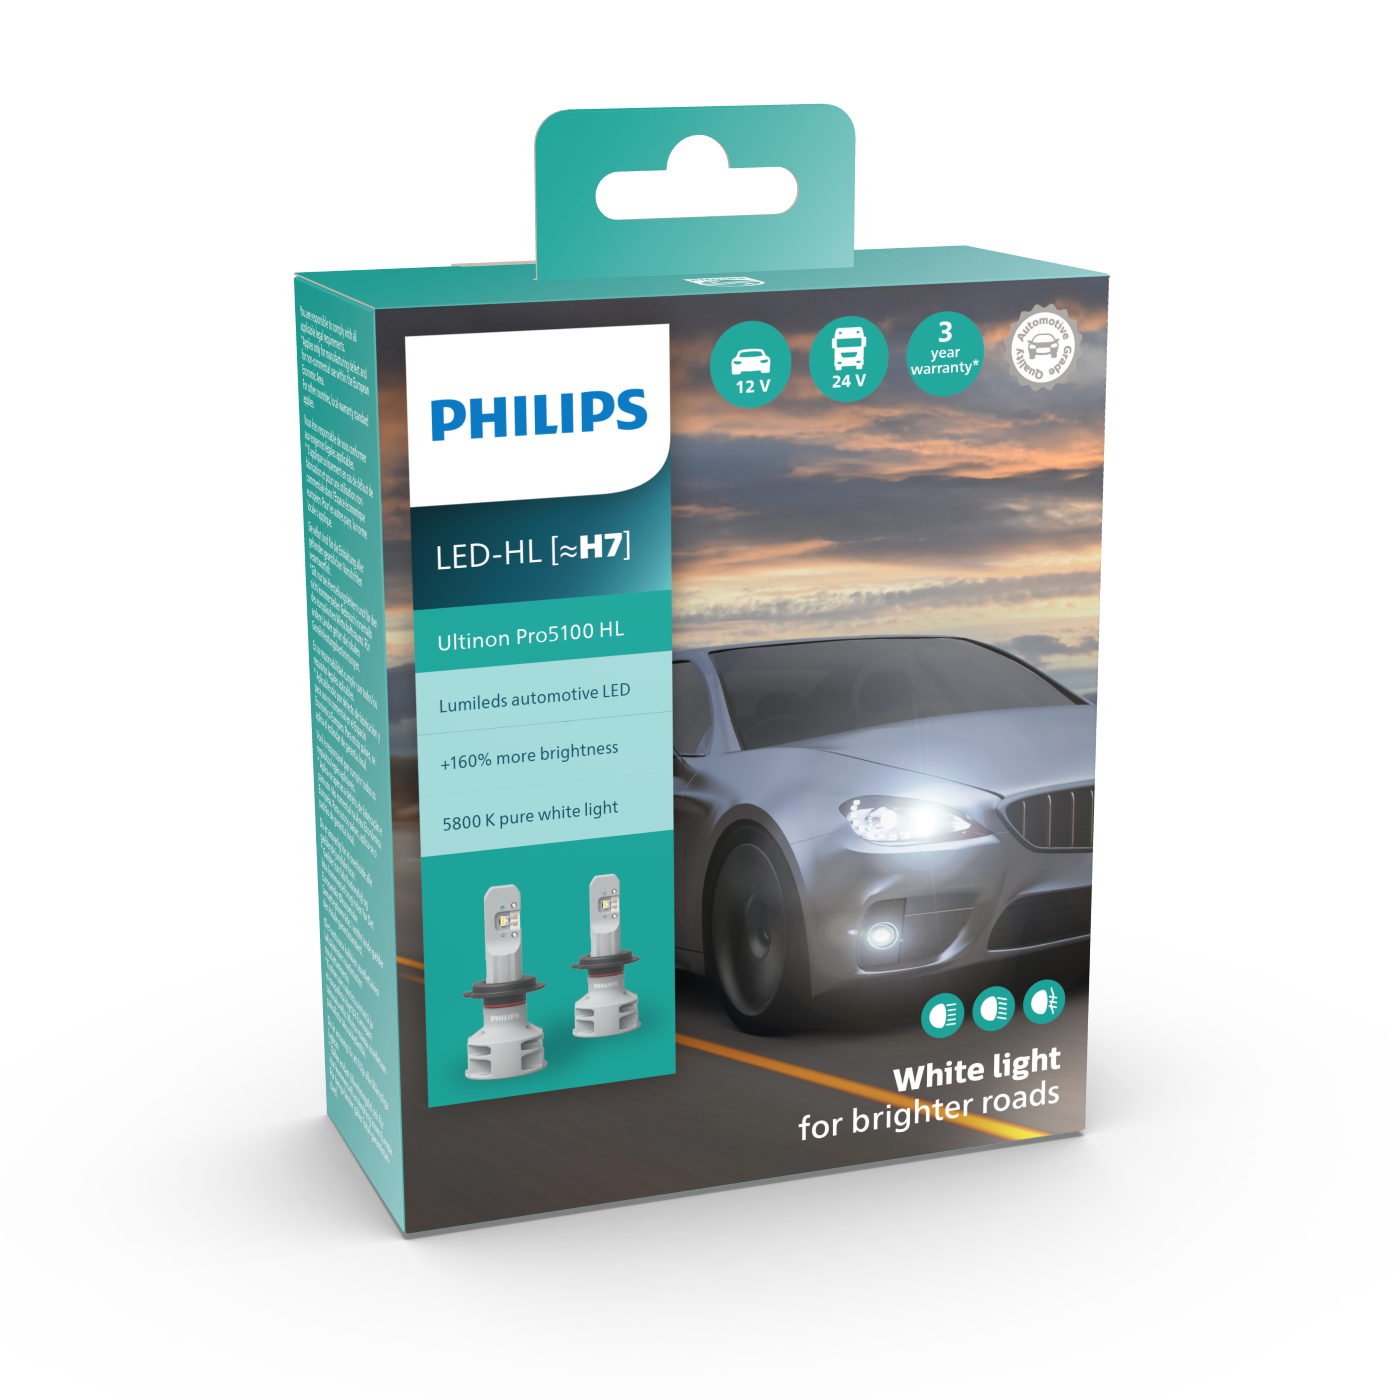 philips ultinon pro5100 packaging